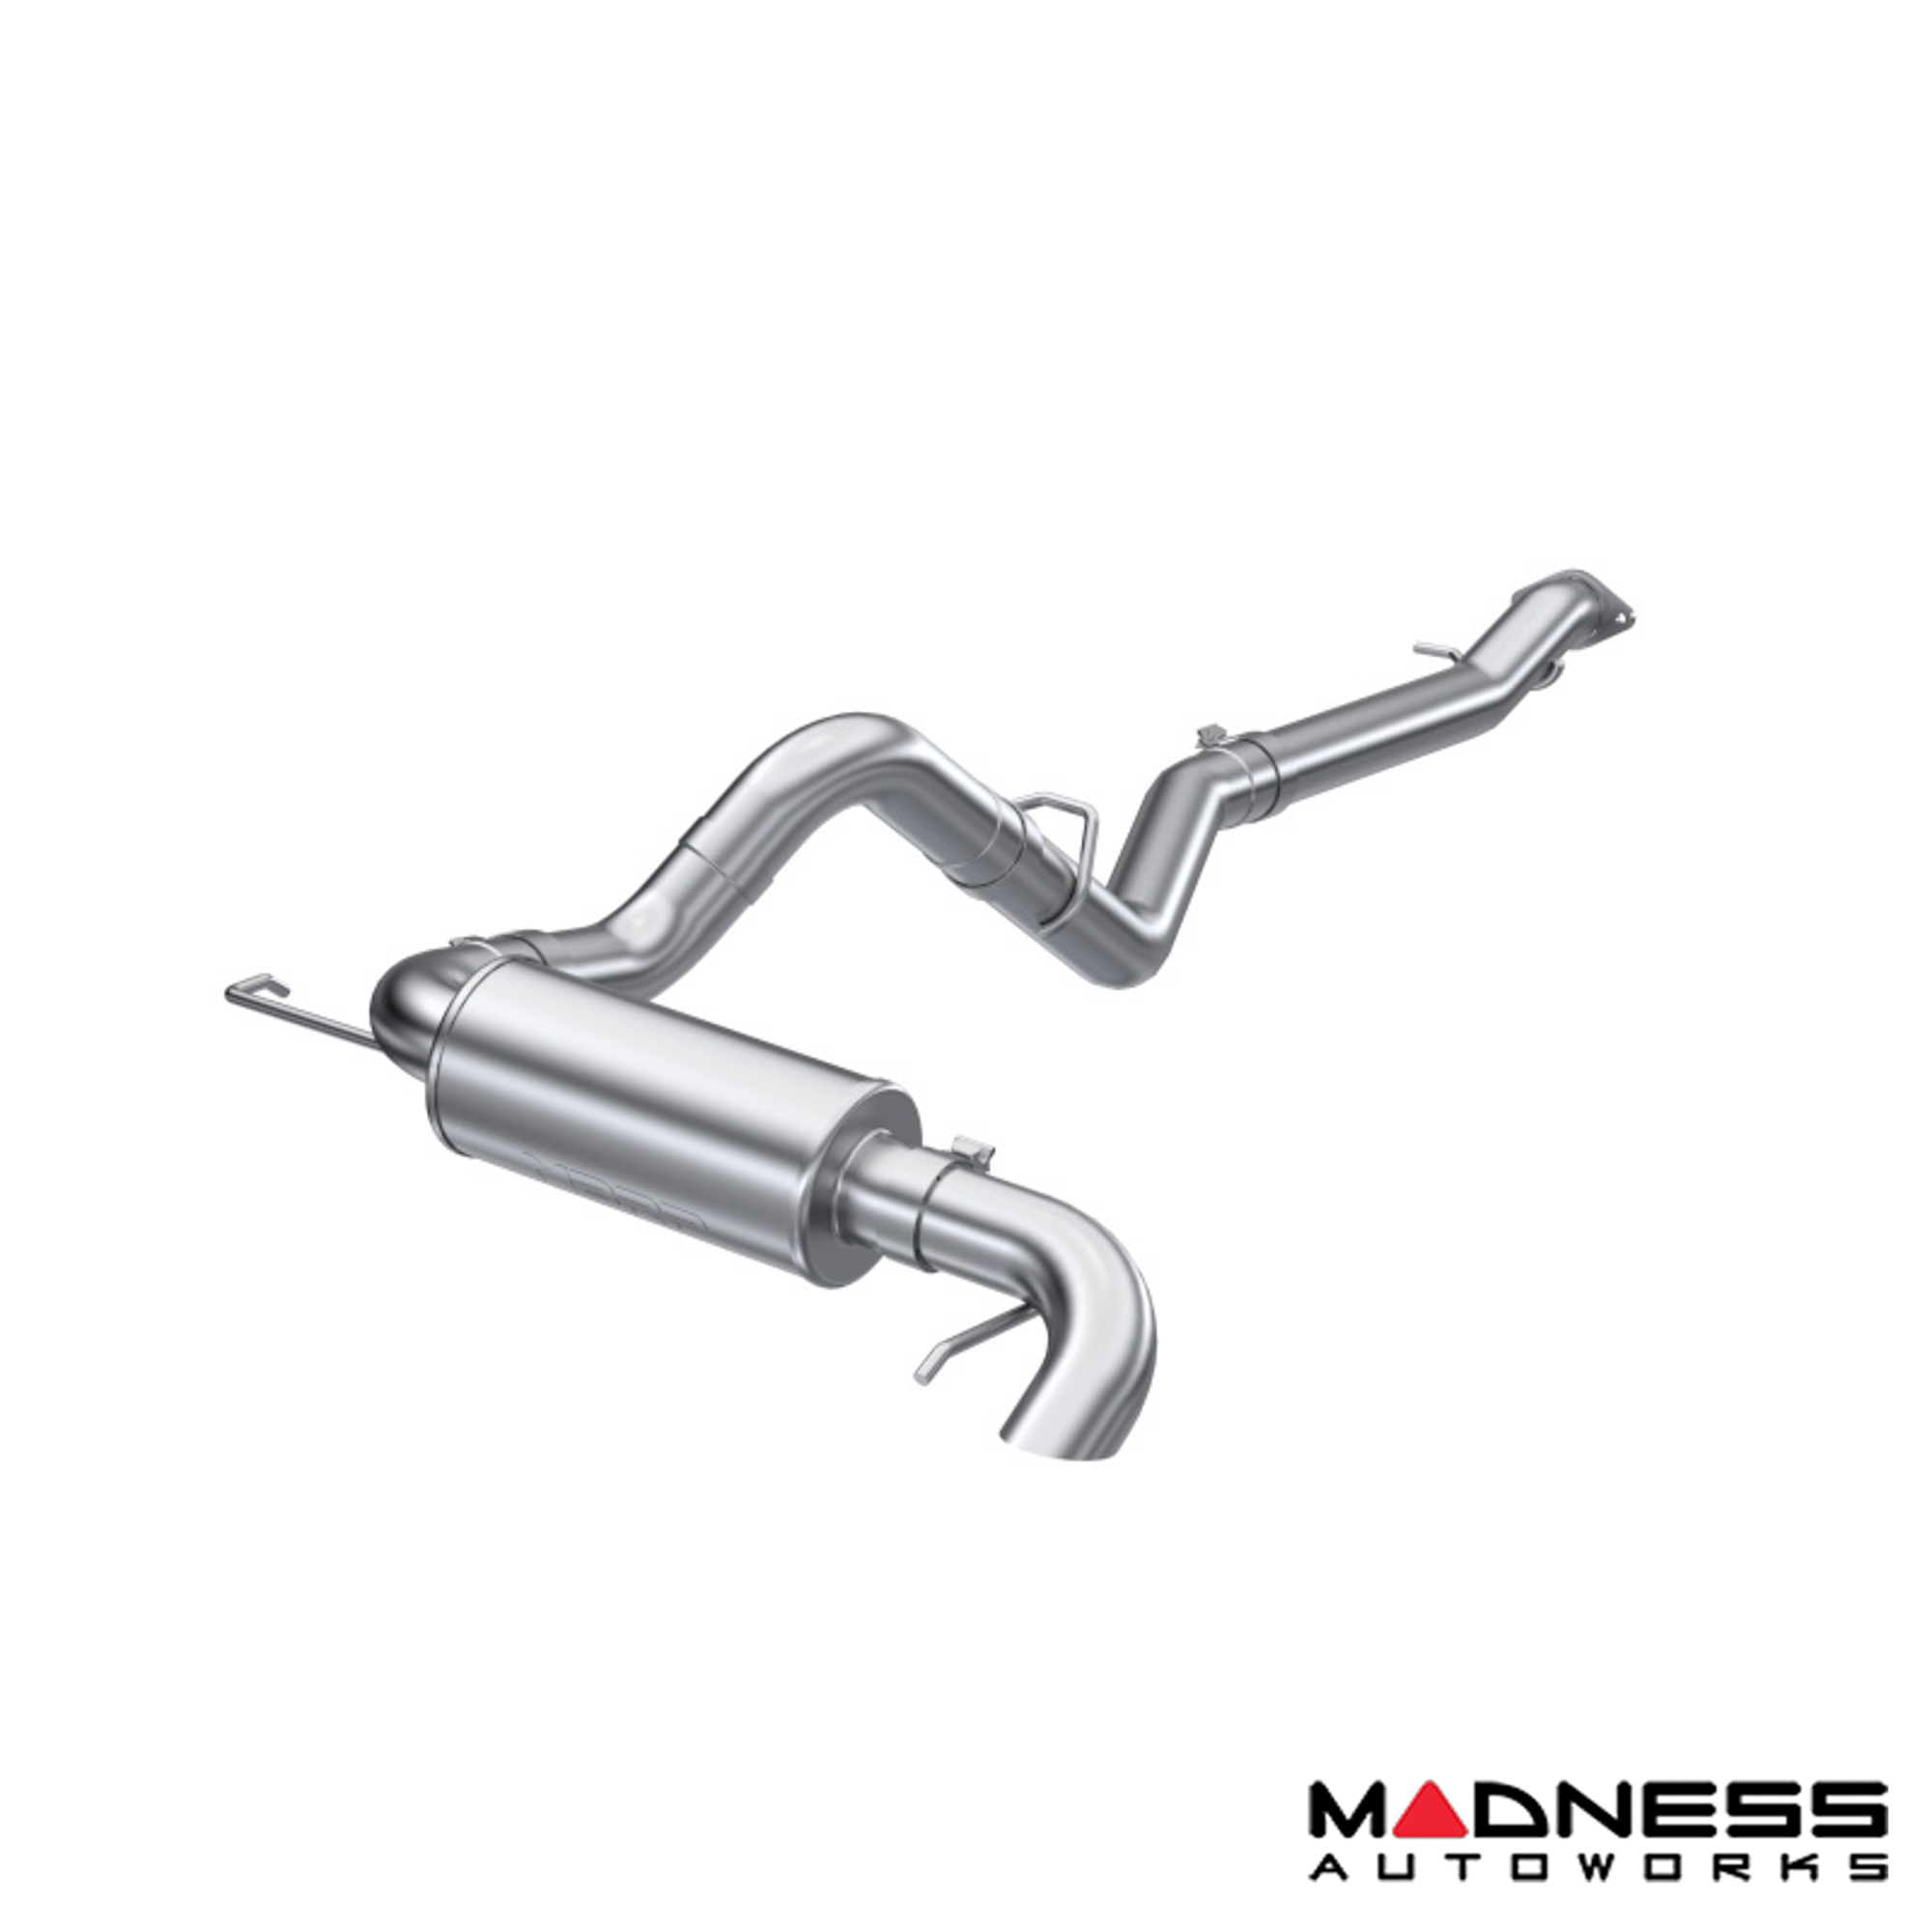 Ford Bronco Performance Exhaust System - Cat Back - MBRP - Aluminized Steel - High Clearance - 3" 